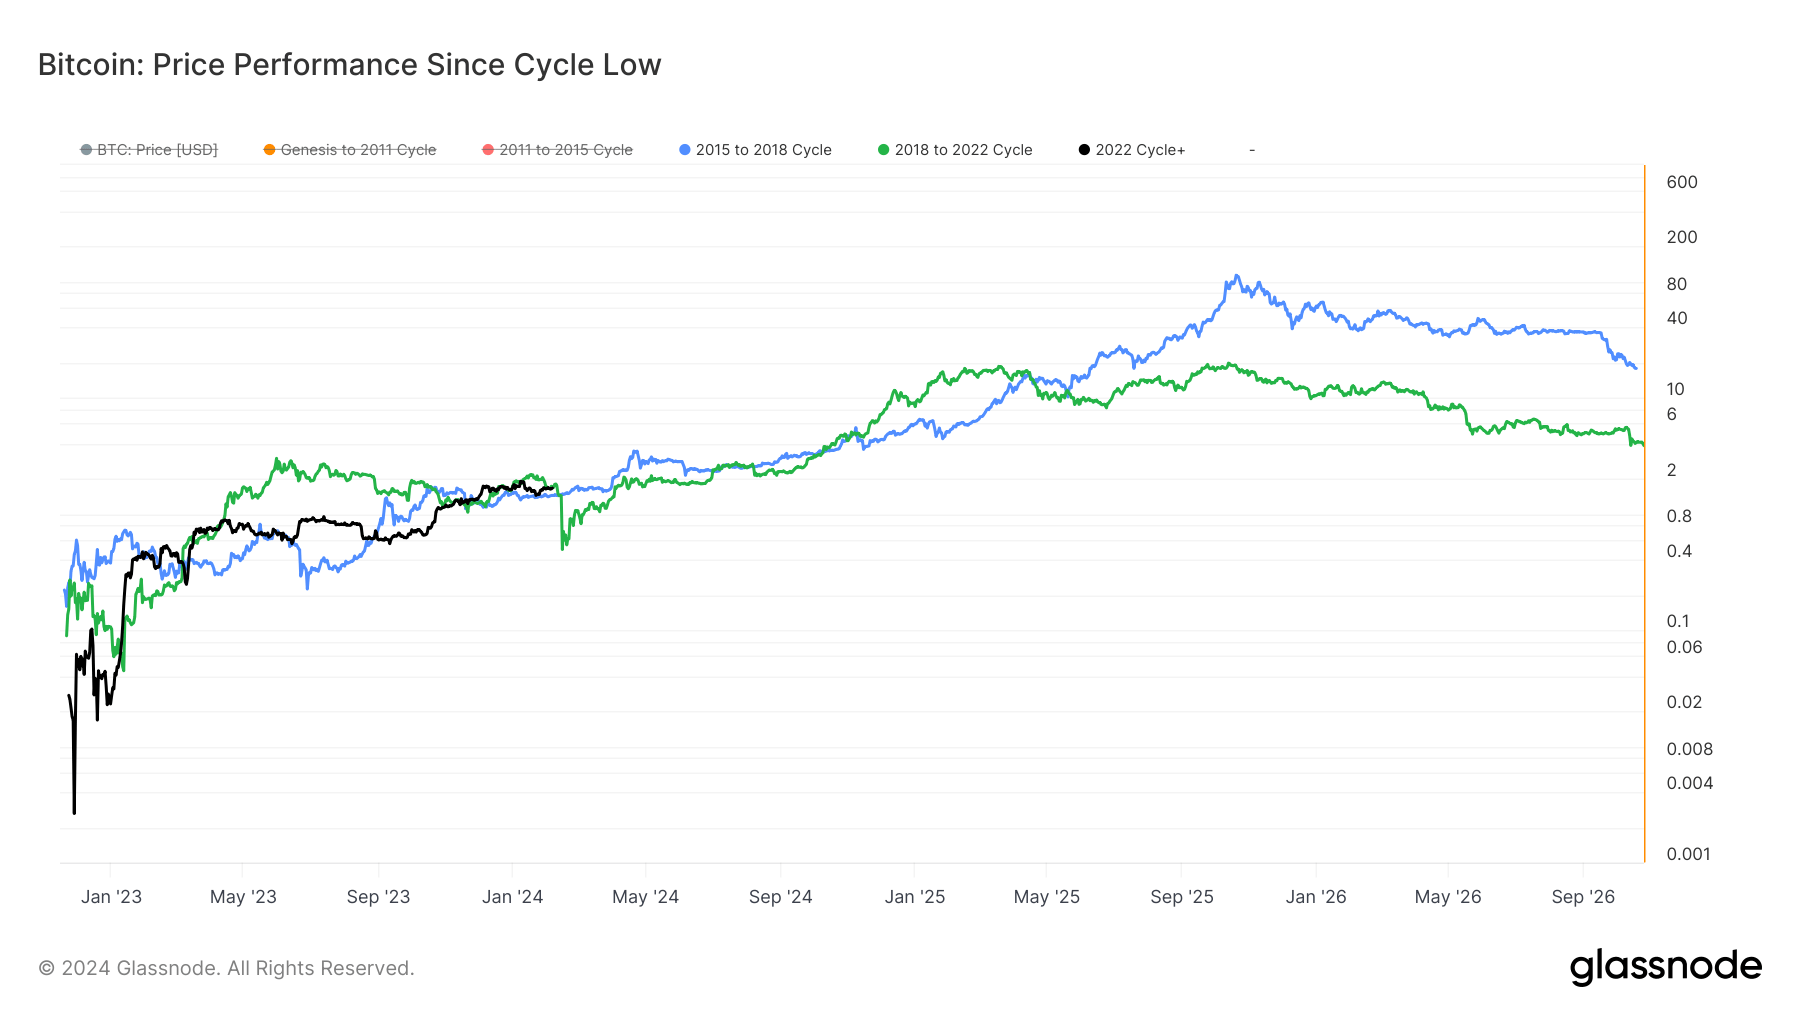 Bitcoin price performance since cycle low: (Source: Glassnode)